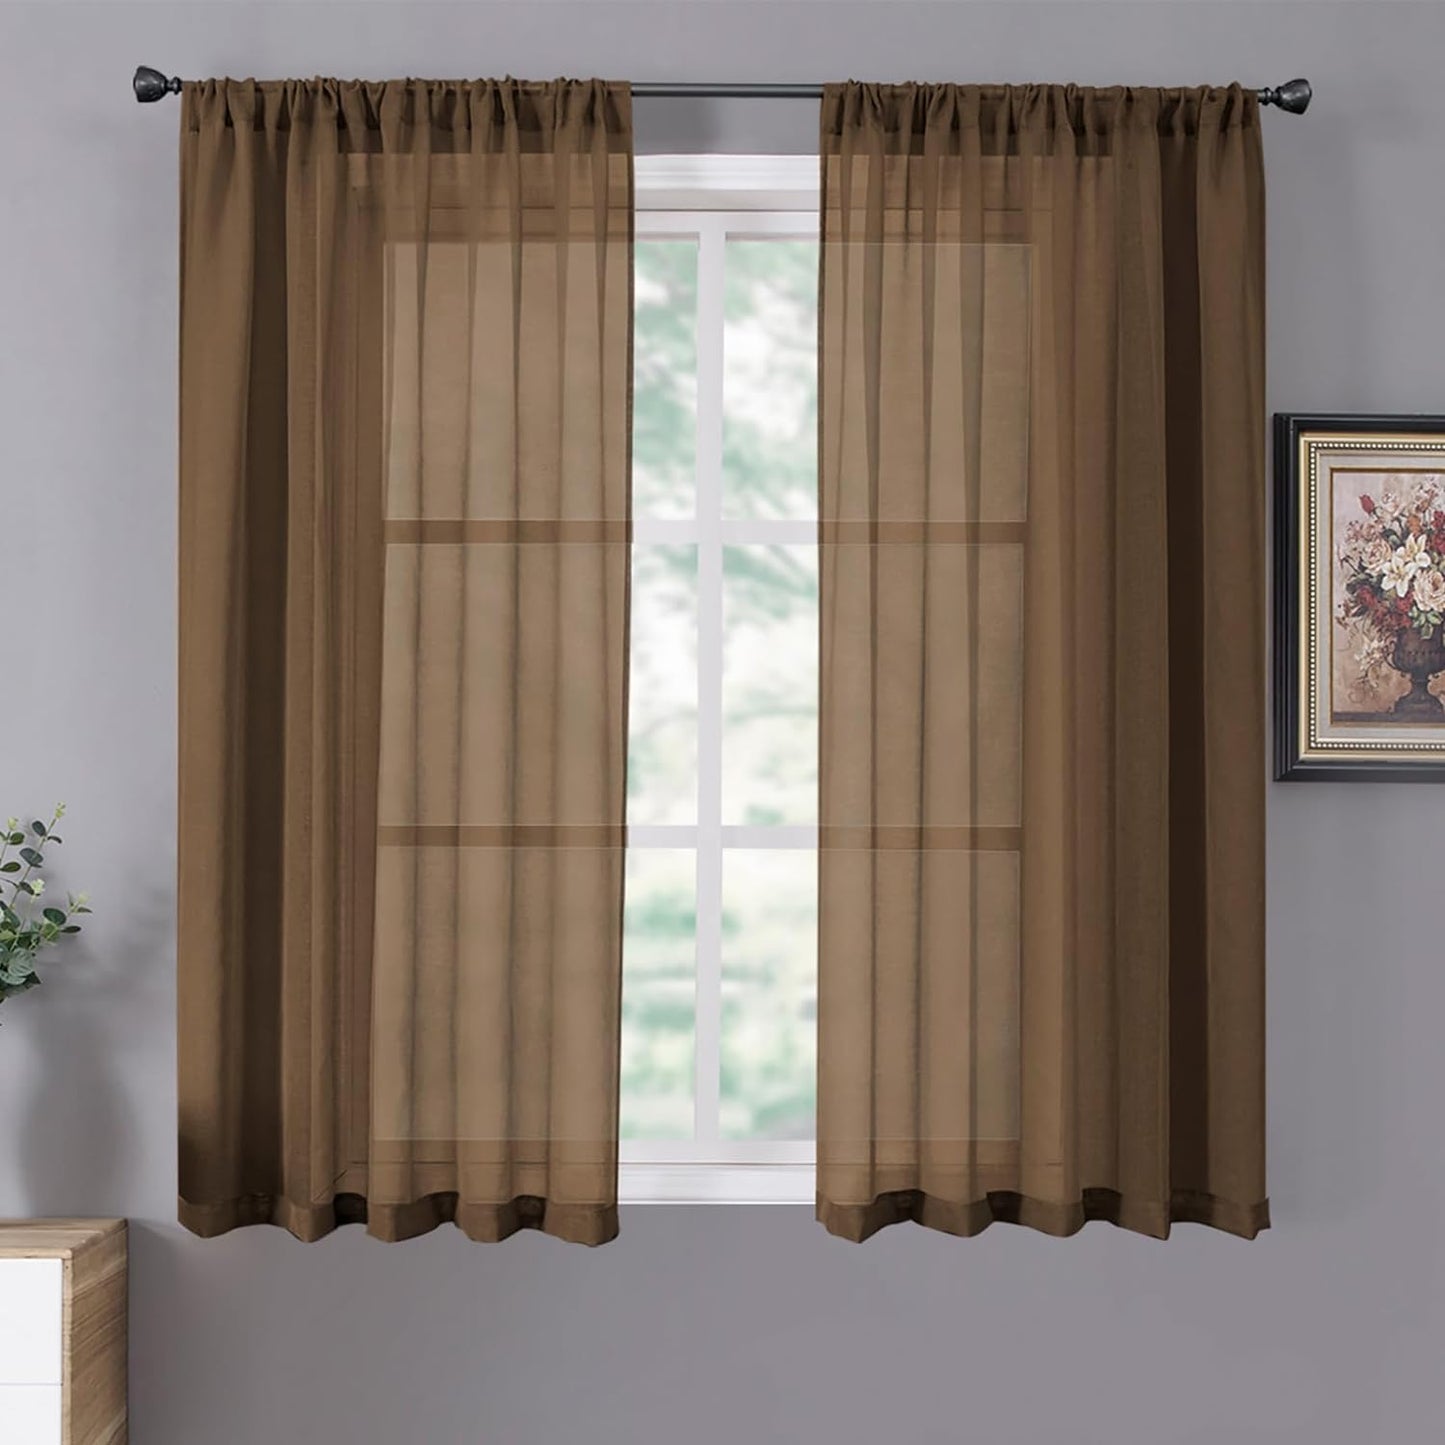 Tollpiz Short Sheer Curtains Linen Textured Bedroom Curtain Sheers Light Filtering Rod Pocket Voile Curtains for Living Room, 54 X 45 Inches Long, White, Set of 2 Panels  Tollpiz Tex Brown 42"W X 54"L 